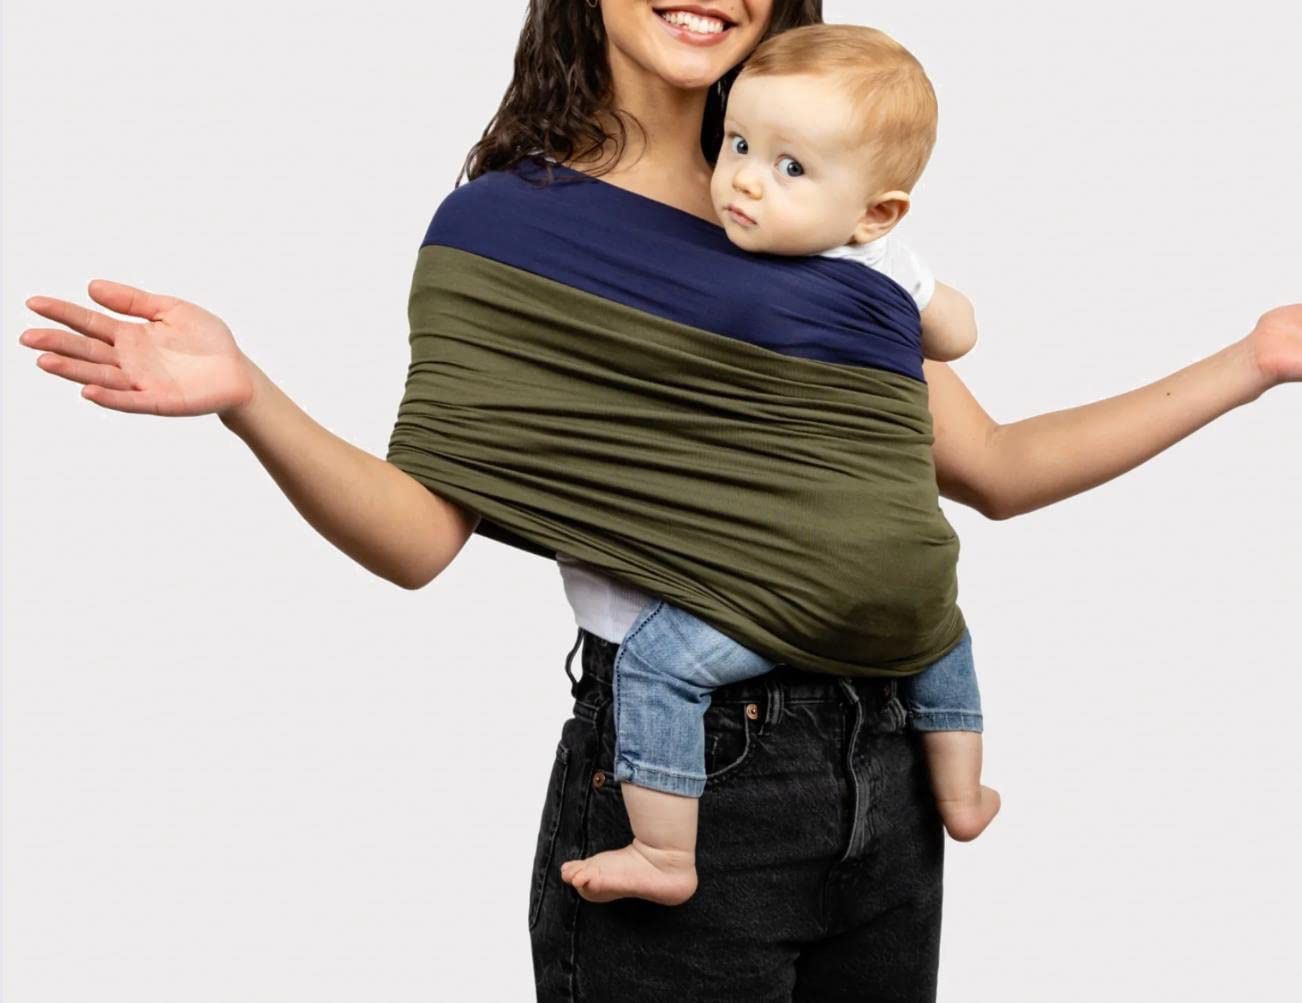 Baby Carrier - Mama’s Bonding Comforter, Adjustable Unisex Multi-Purpose Baby Carrier, Hassle-Free, Lightweight and Ultra Soft, Easy to Wear Infant Sl